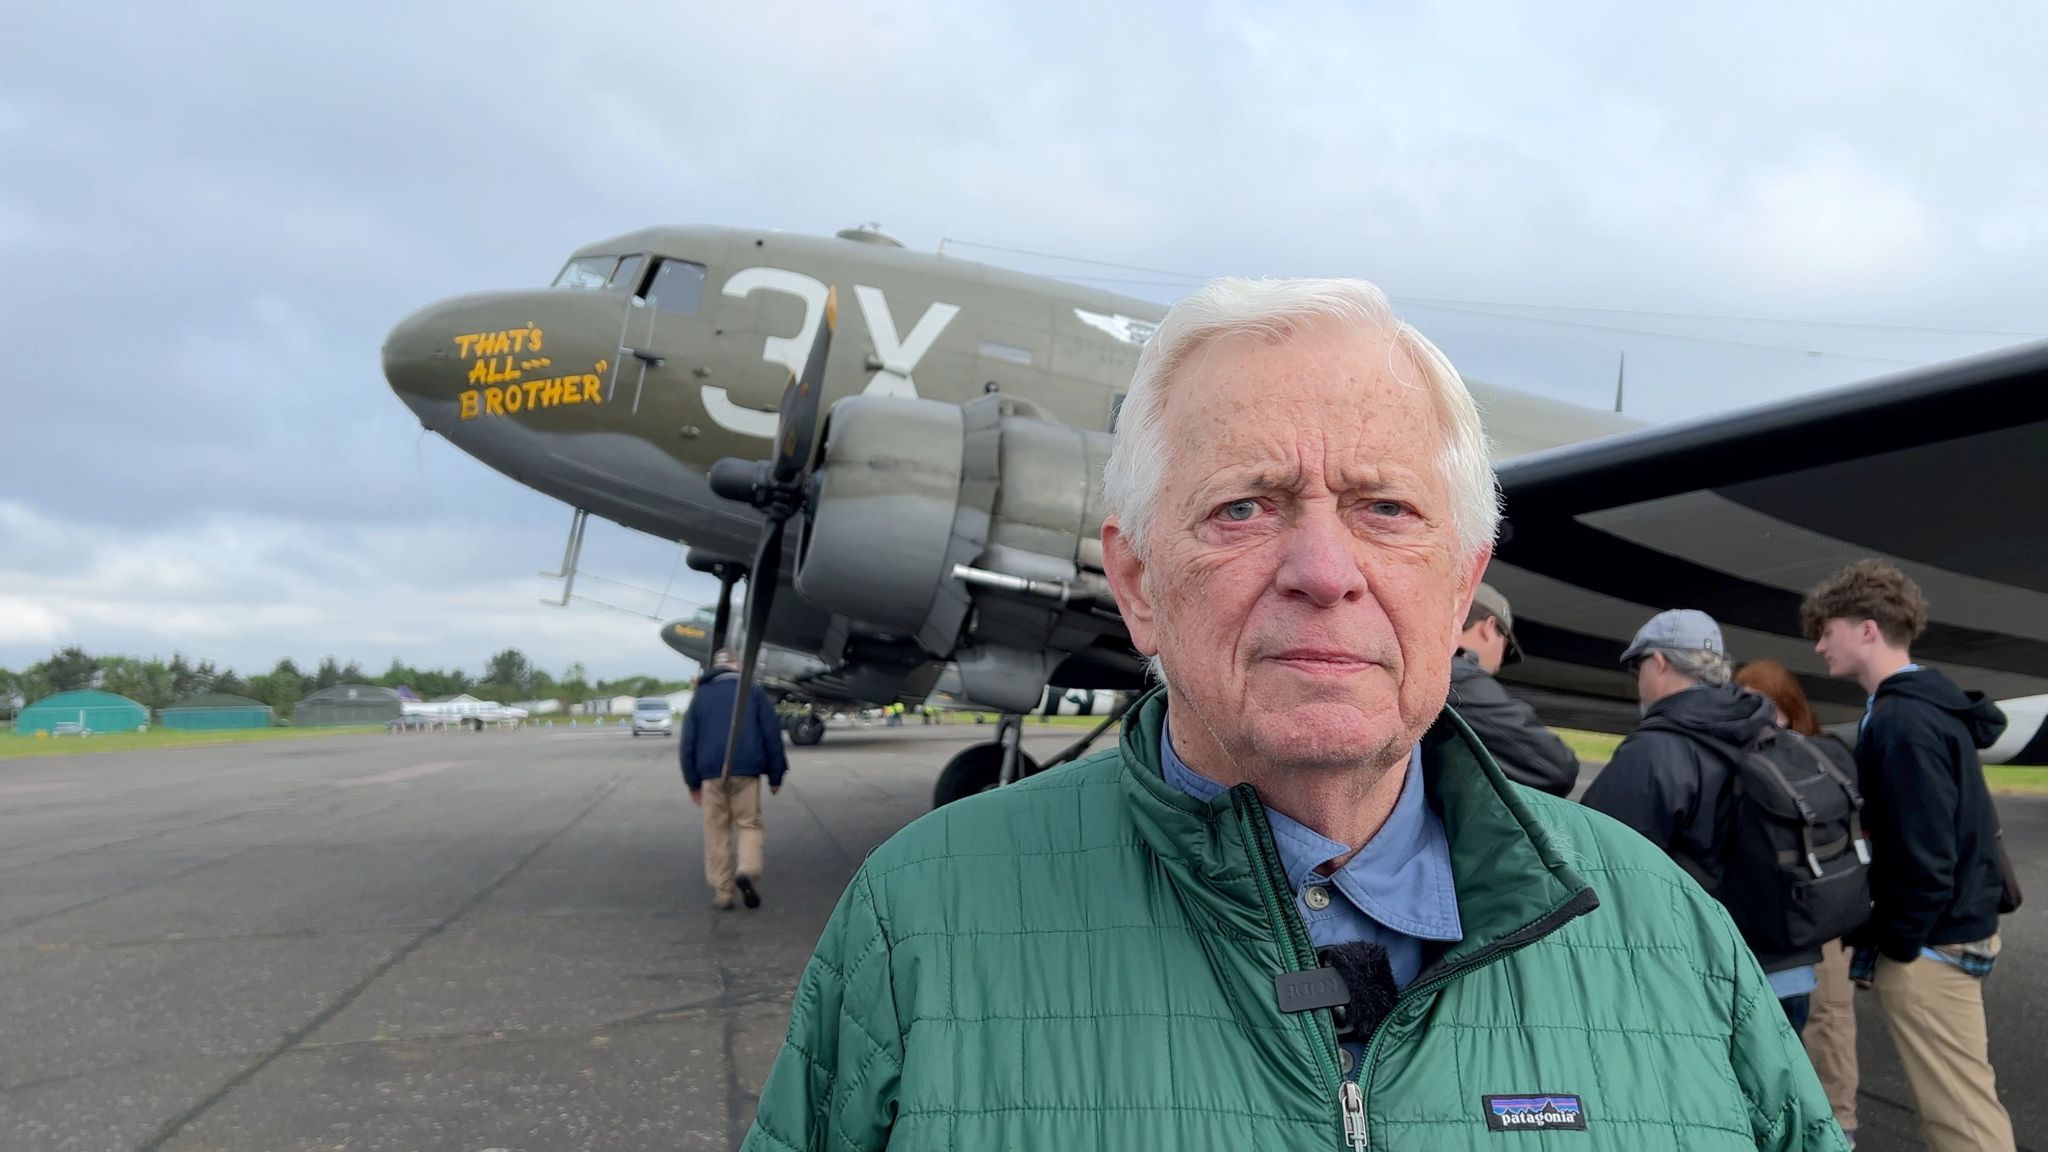 Al Reams Jr in front of his father's plane that led the aircraft flying from Greenham Common on d-day